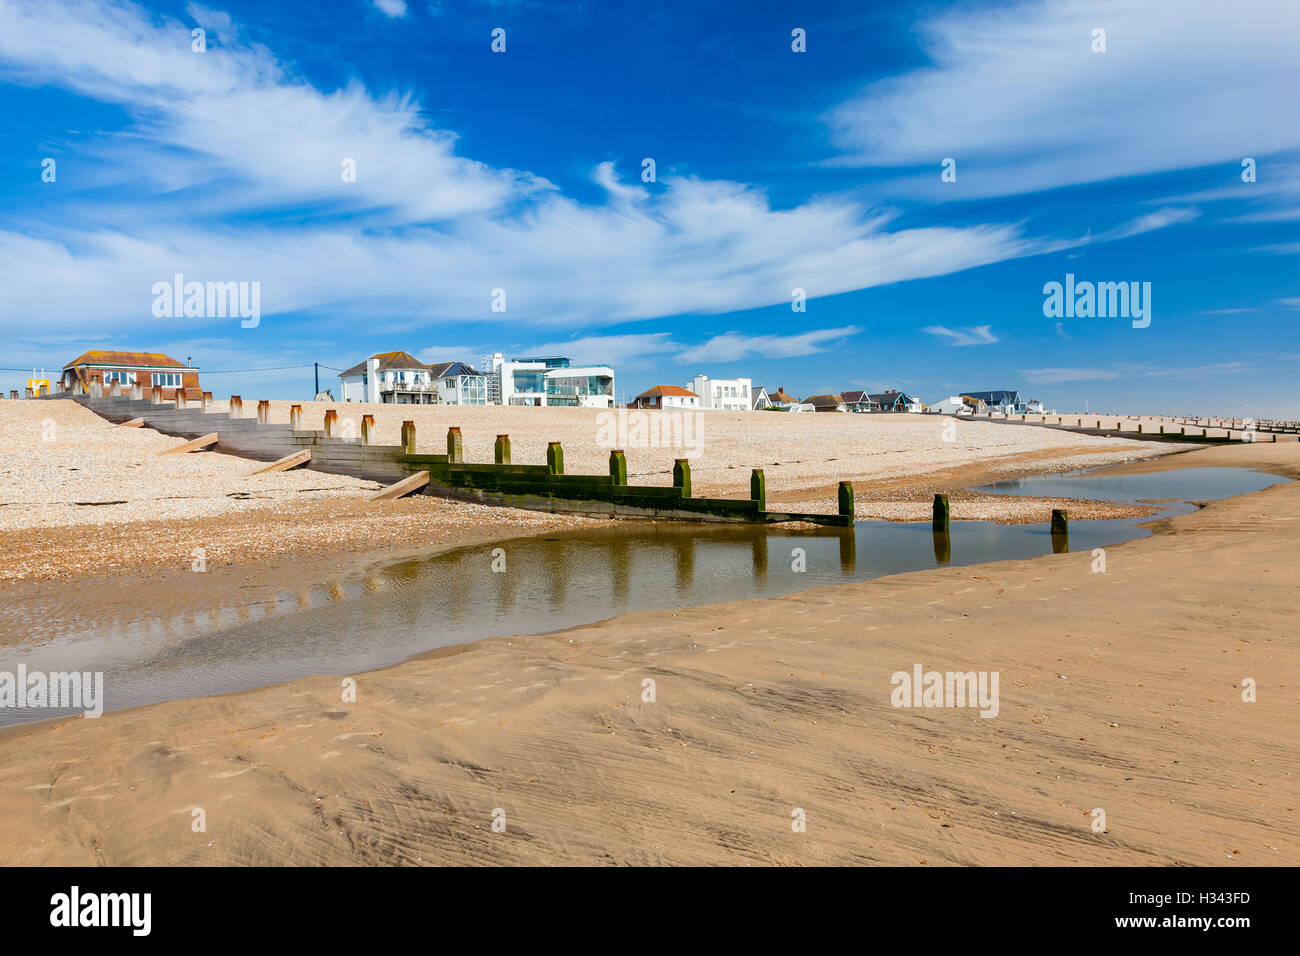 Timber Groynes on the Golden sandy beach at Camber Sands East Sussex England UK Europe Stock Photo